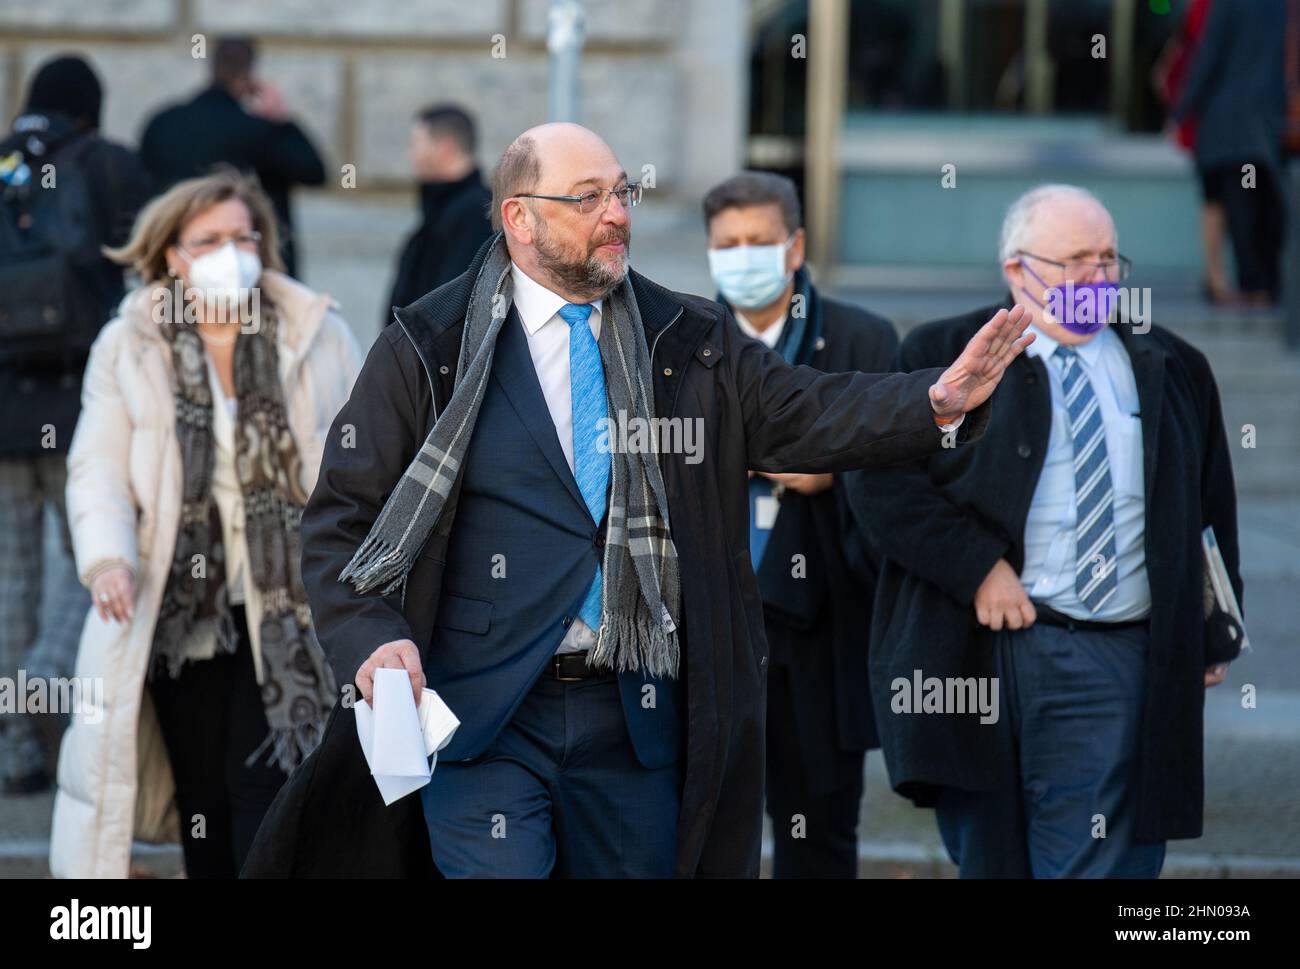 Berlin, Germany. 13th Feb, 2022. Martin Schulz (SPD) arrives at the Paul Löbe House for the election of the Federal President by the Federal Assembly. Credit: Christophe Gateau/dpa/Alamy Live News Stock Photo